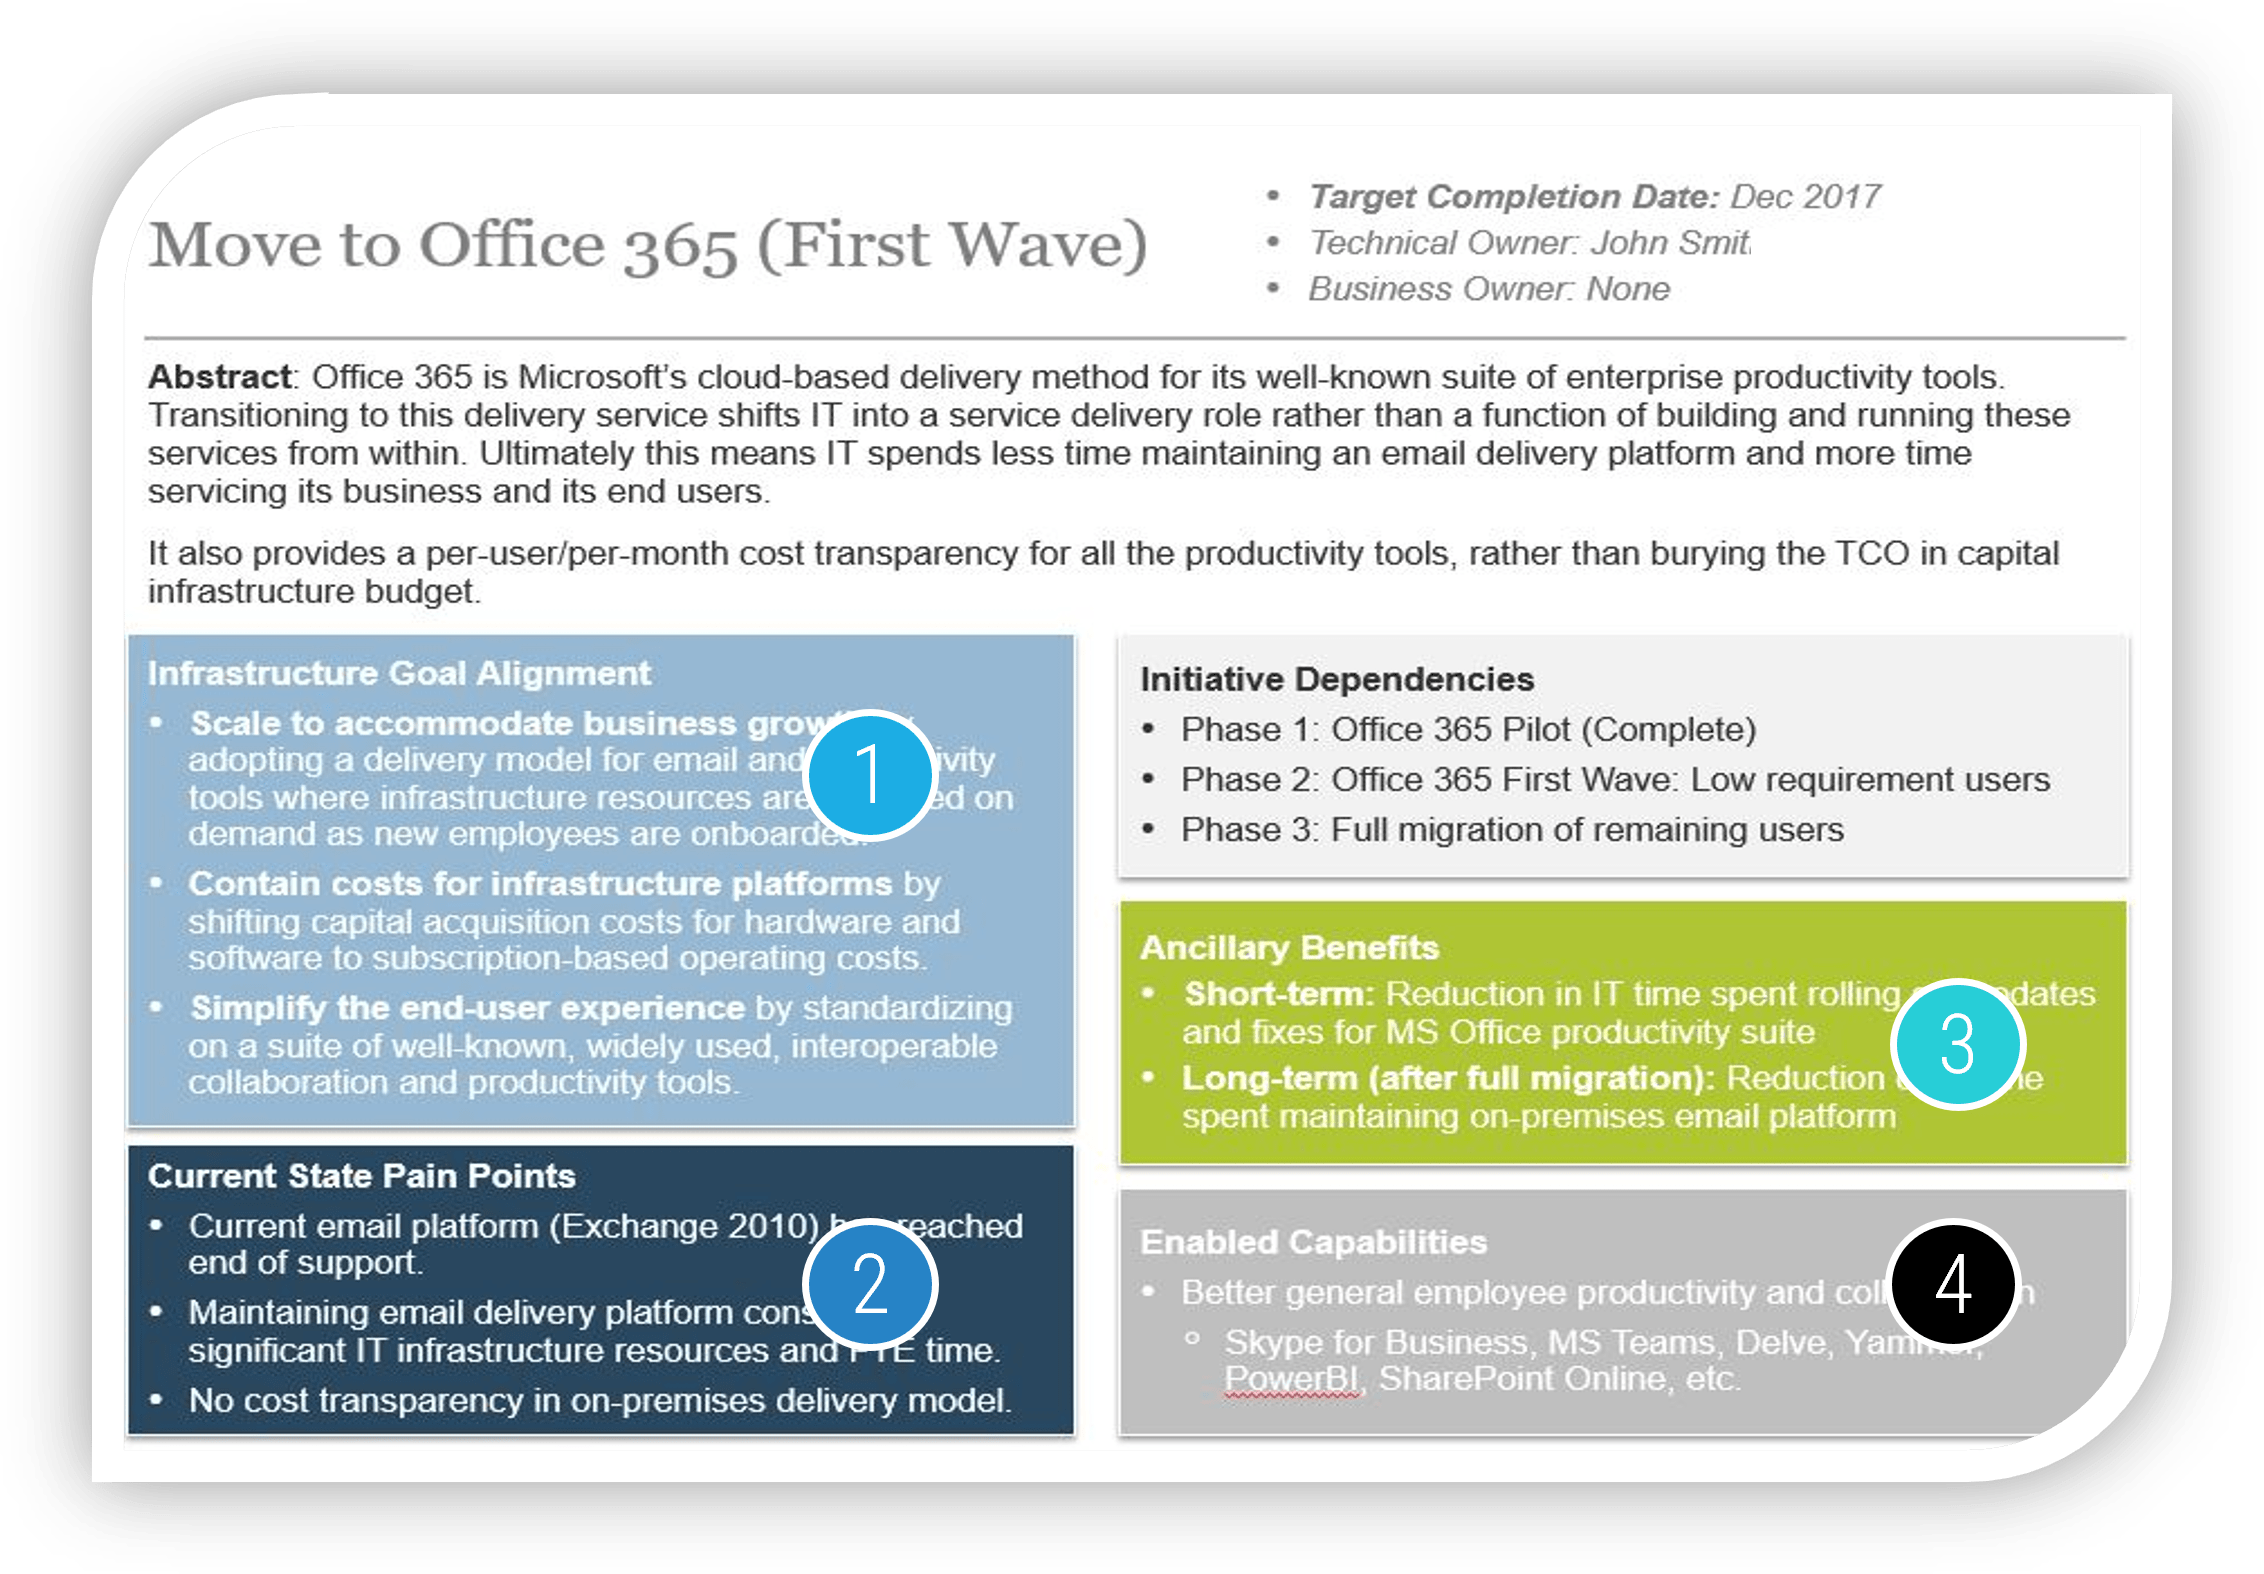 An image of the Move to Office 365, with the numbers 1-4 superimposed over the image.  These correspond to steps 1-4 above.